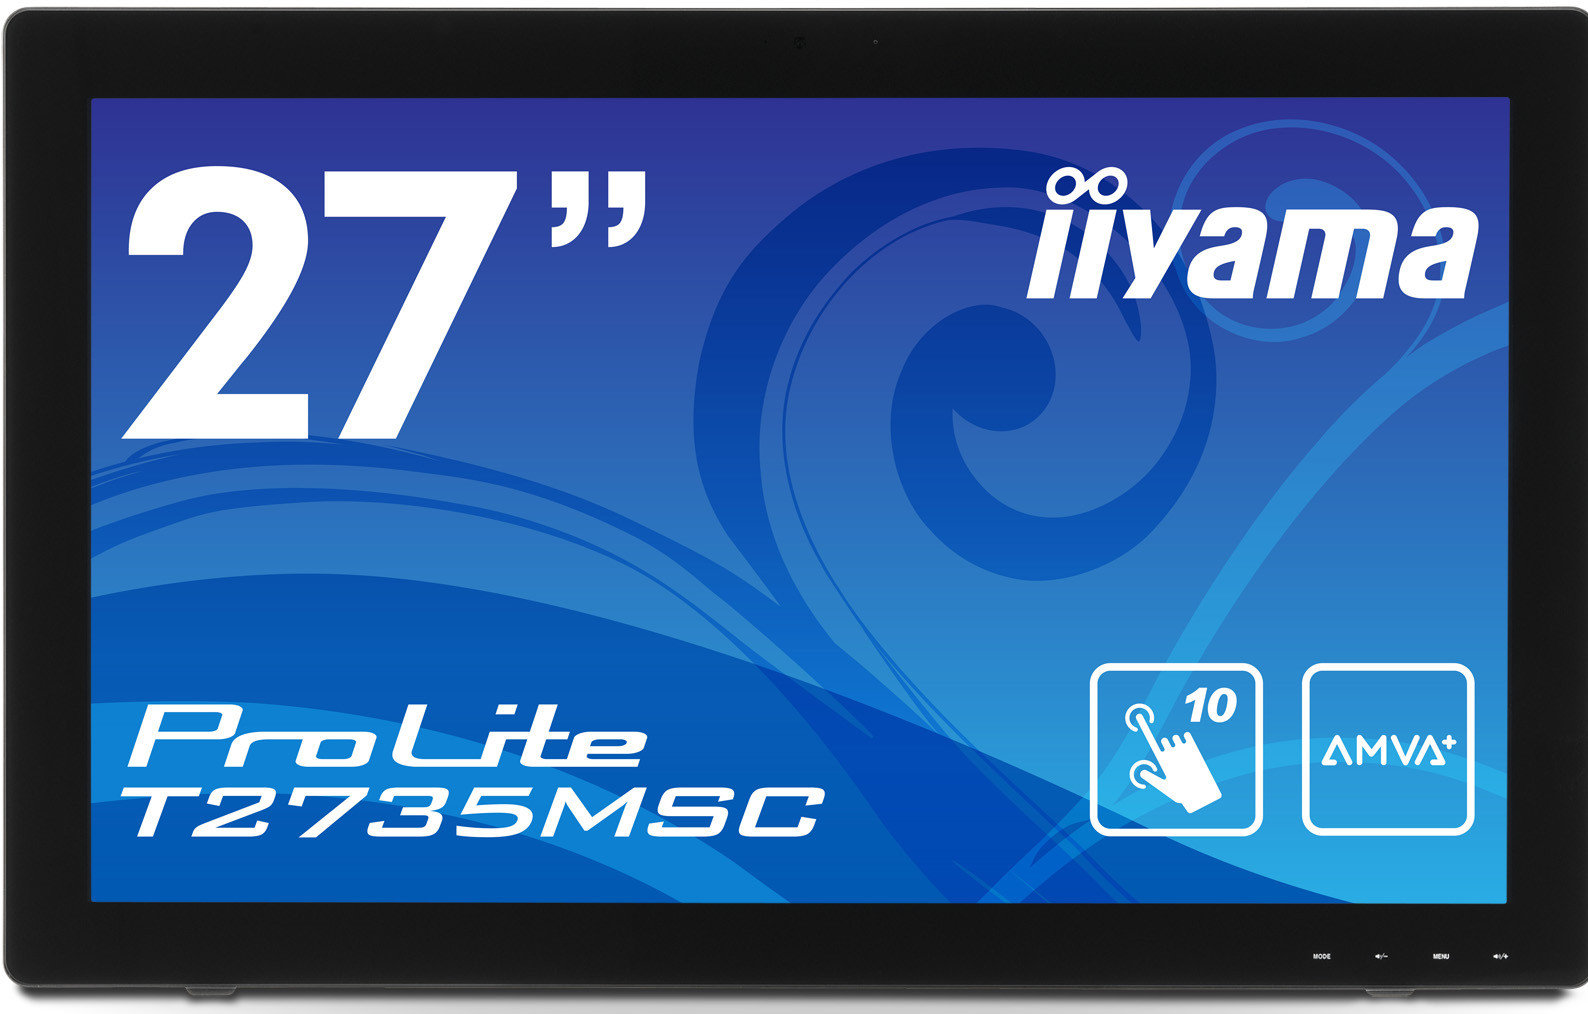 Iiyama Rolls Out Pro Lite T2735MSC 27-inch Touch Monitor | TechPowerUp